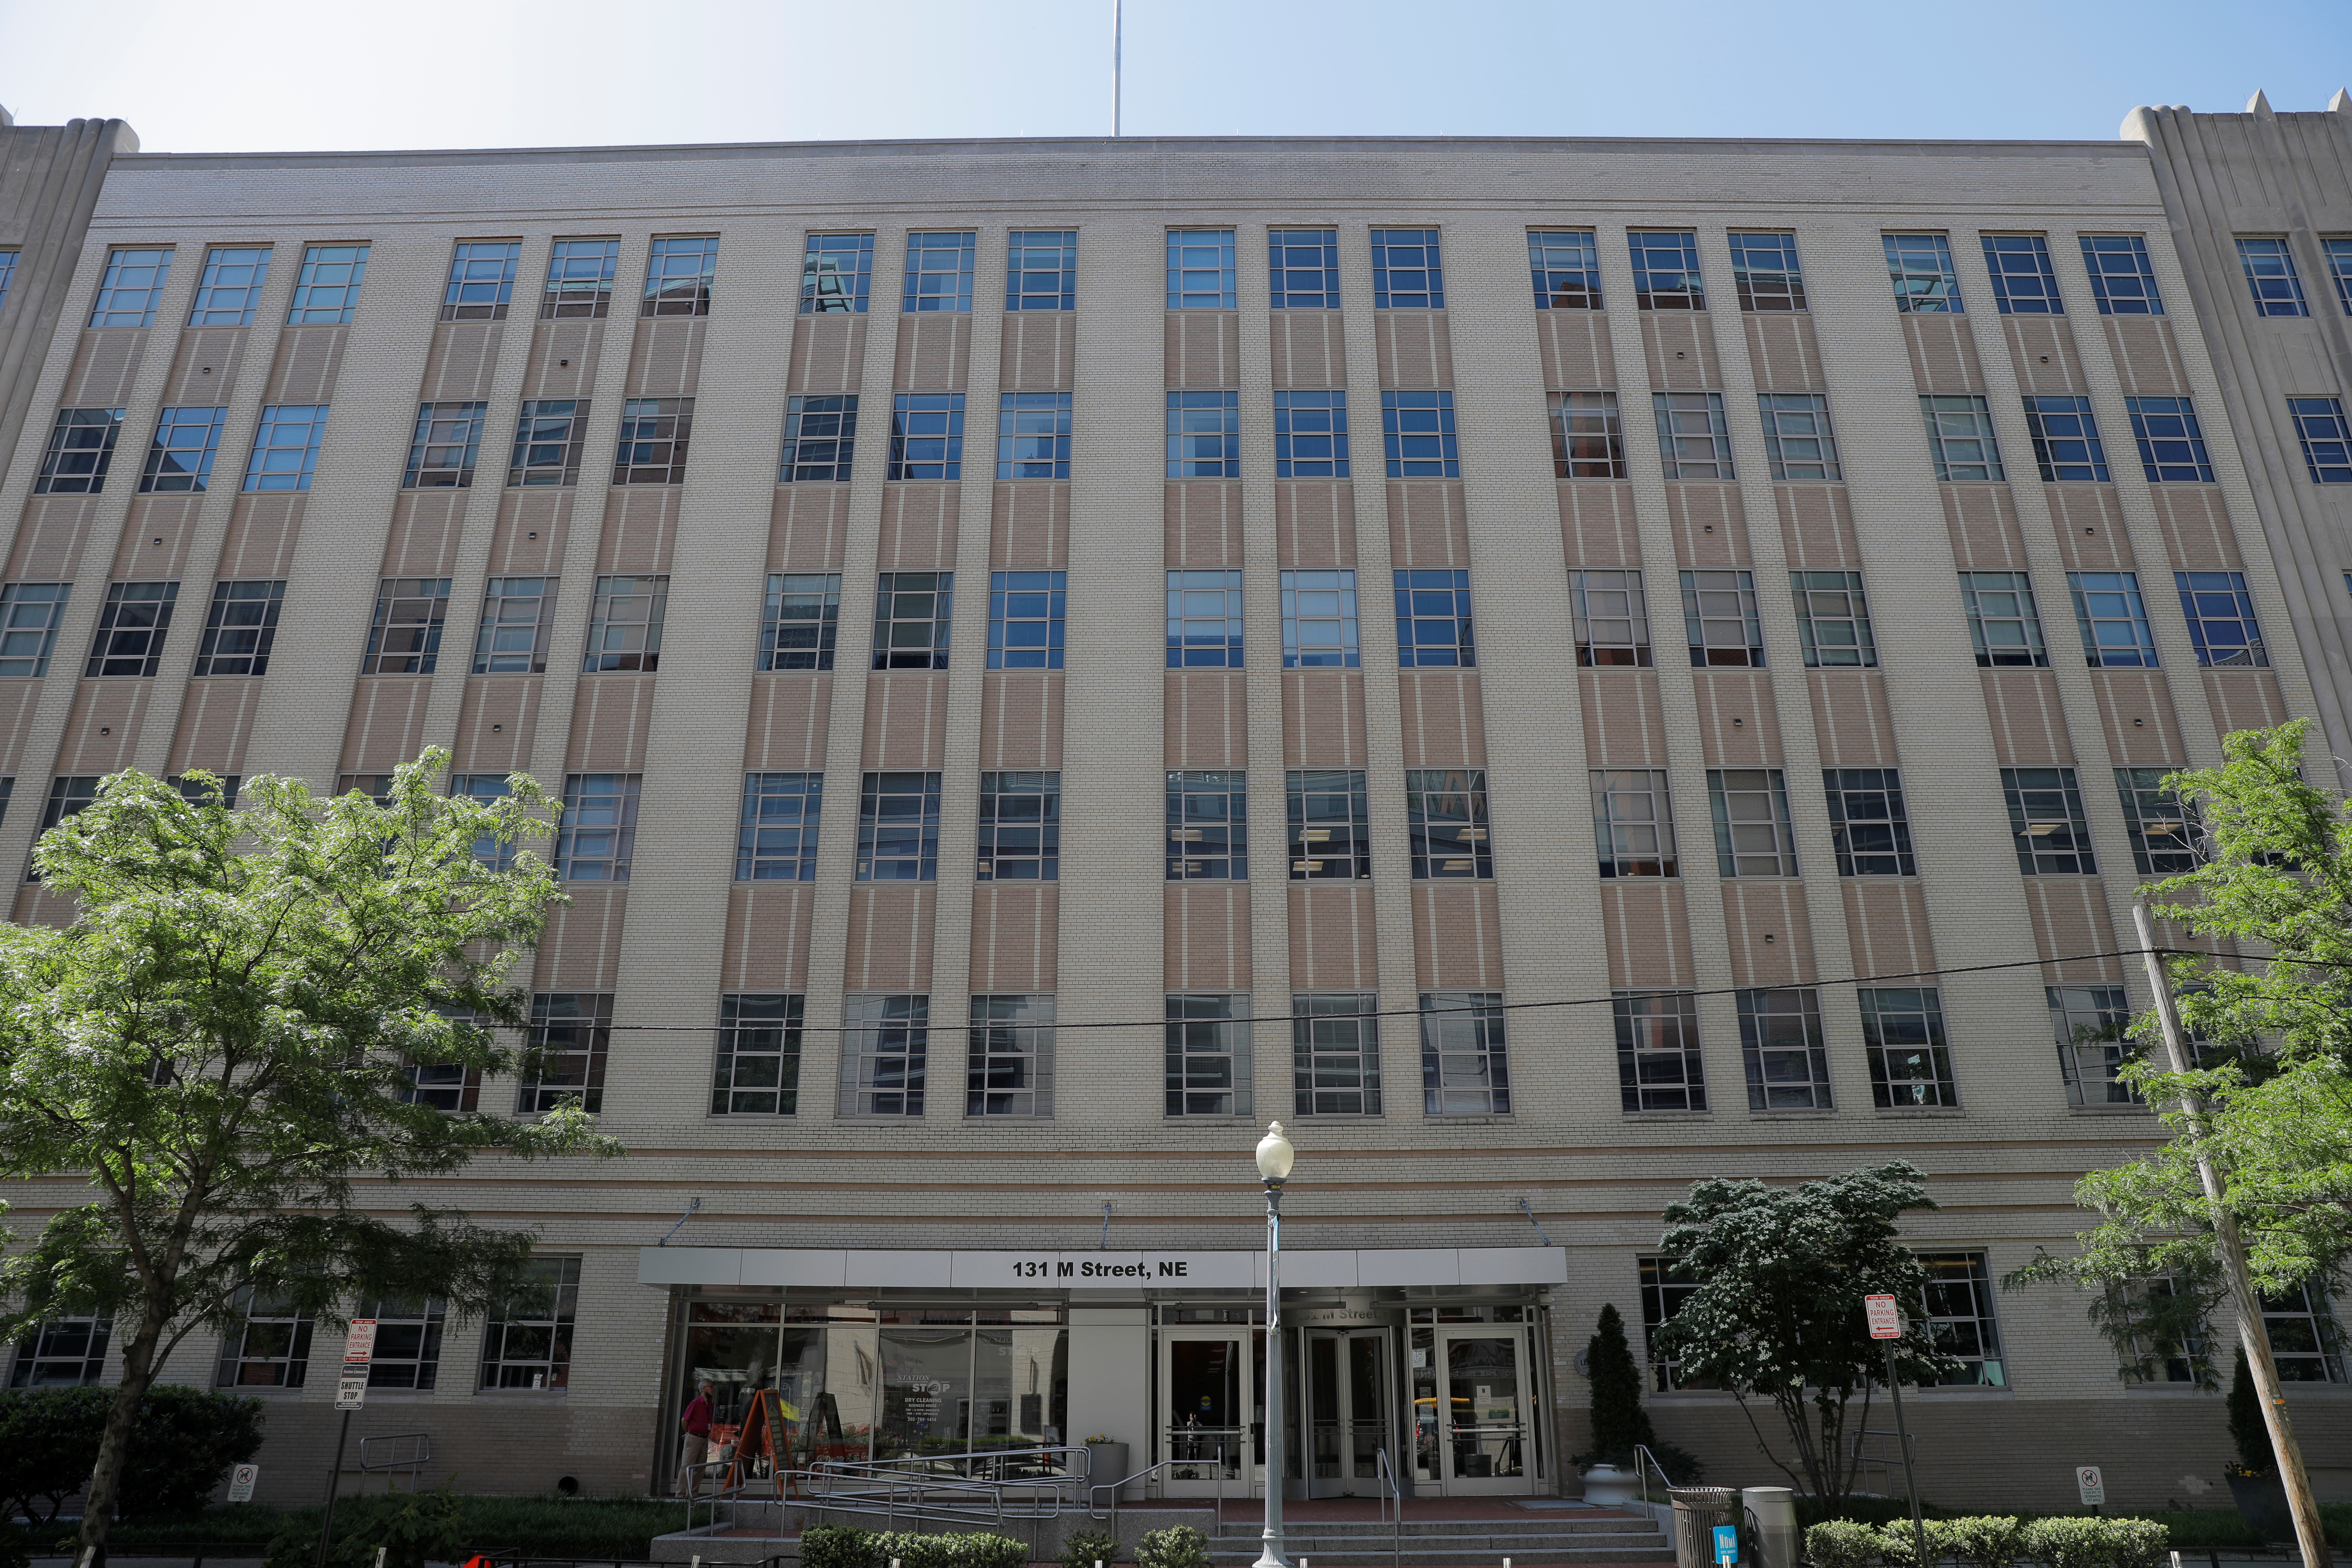 The headquarters of The United States Equal Employment Opportunity Commission (EEOC) is seen in Washington, D.C.